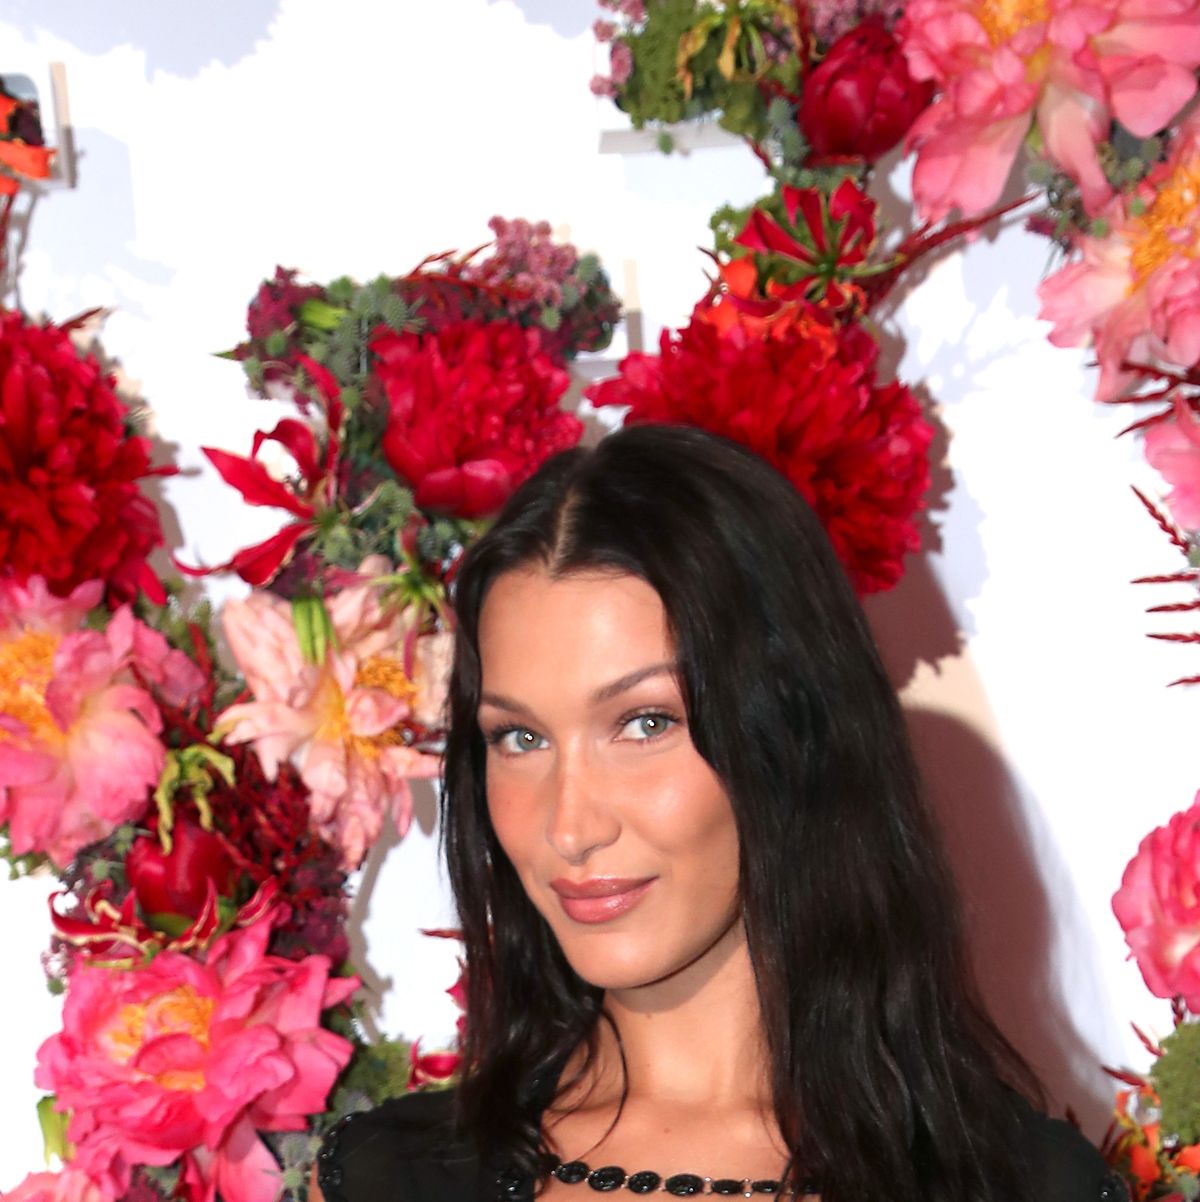 bella hadid rocks neon vest over a short white dress as she